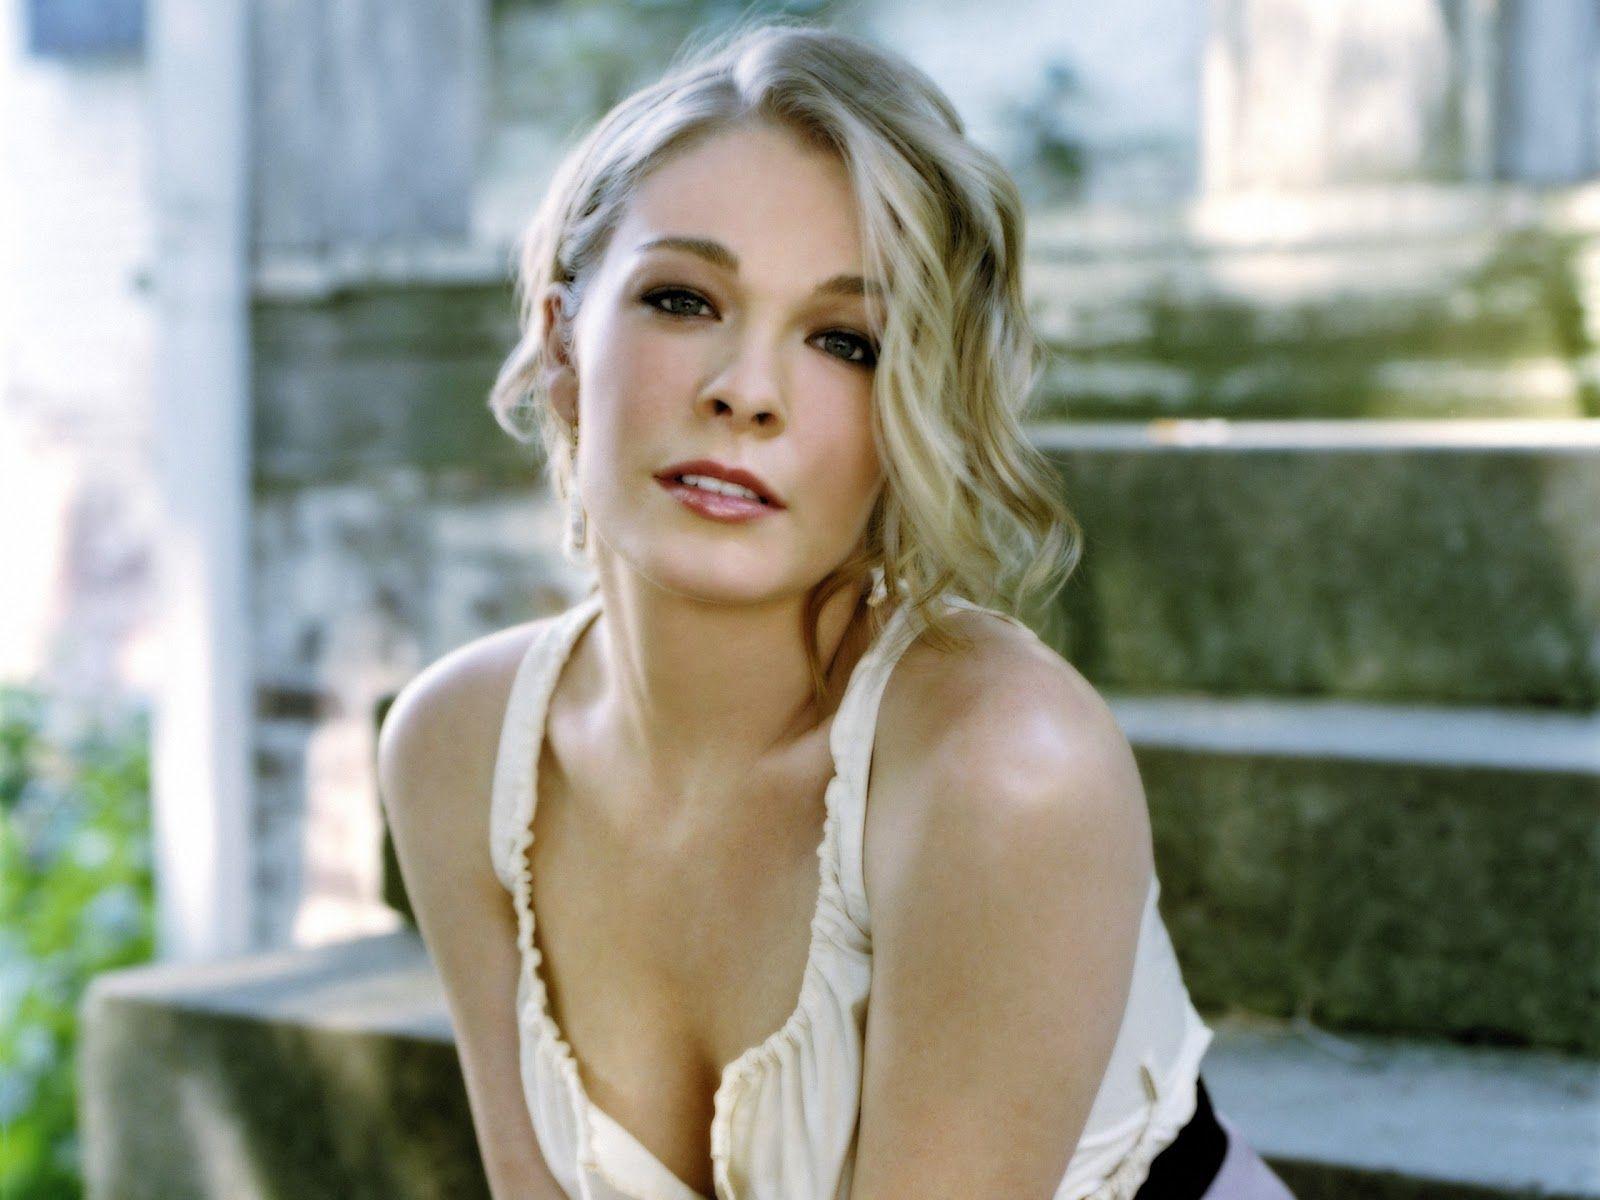 LeAnn Rimes Booking Agent Contact & Private Performance Fee